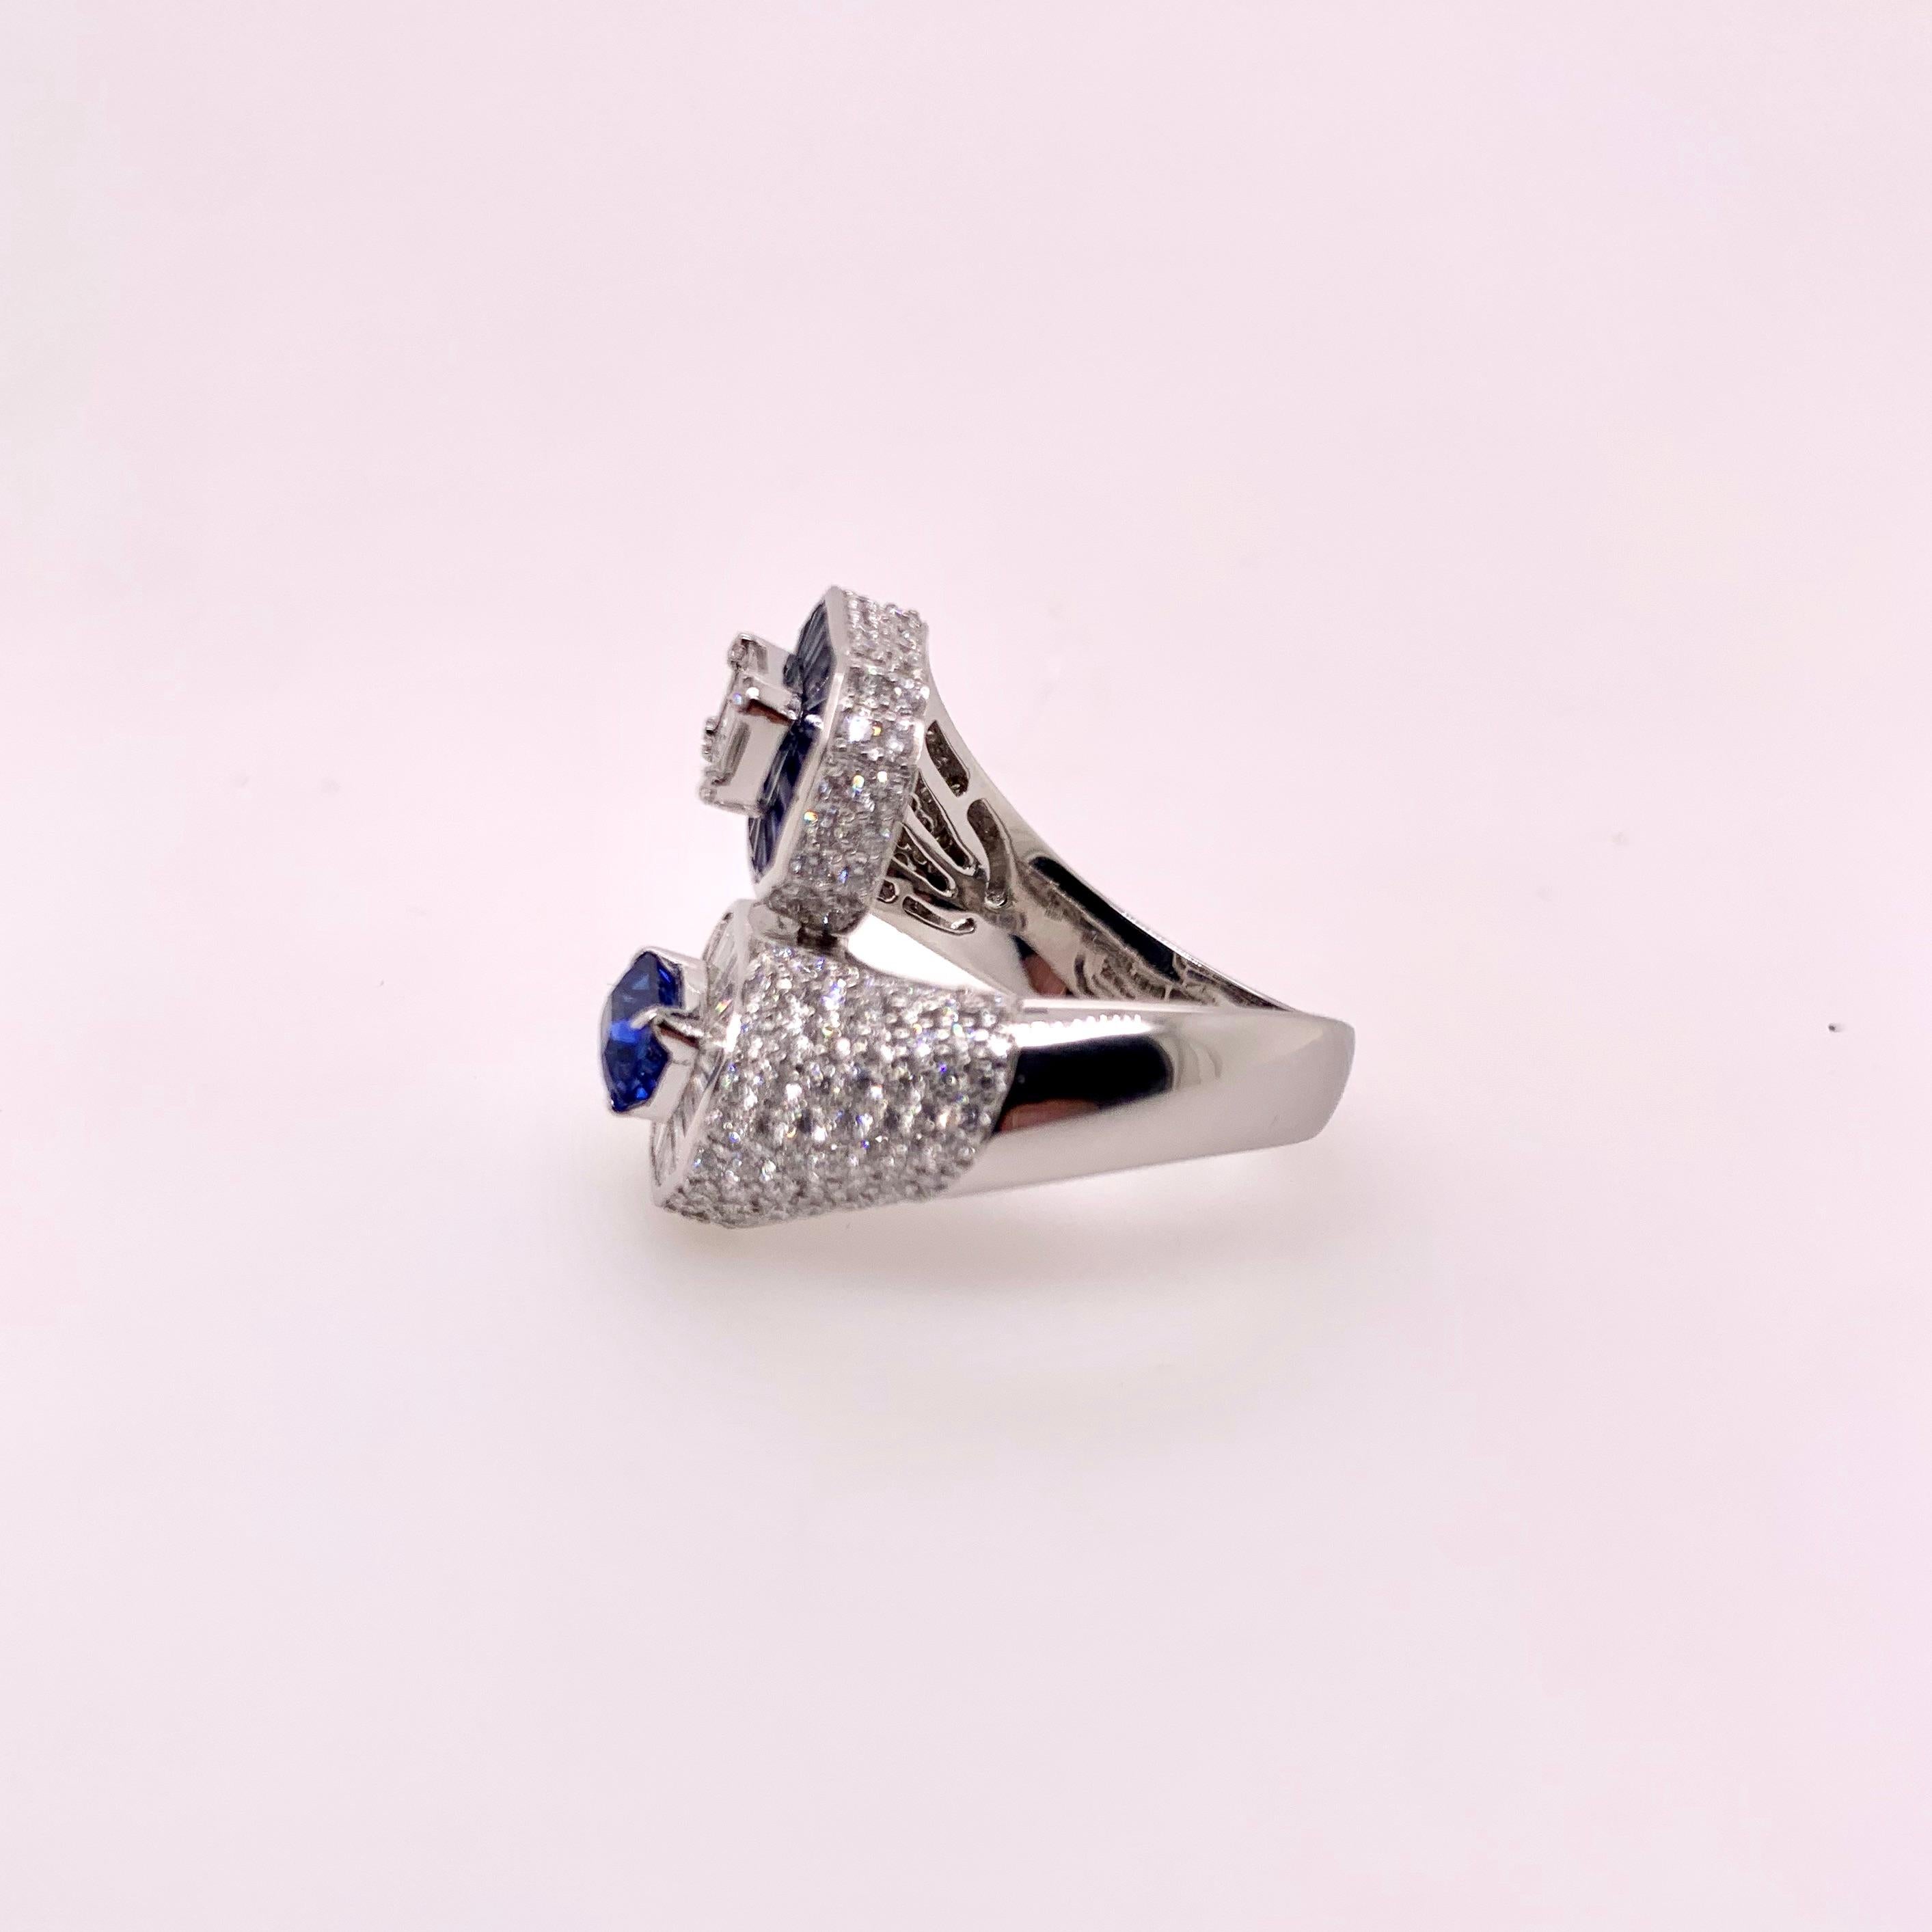 A classic combination of sapphires and diamonds in an unusual bypass style ring!  The alternating pattern gives a gorgeous contrast of the rich blue hue in the sapphires against the white diamonds in this stunning ring! 

Sapphires:  1.22 cts,